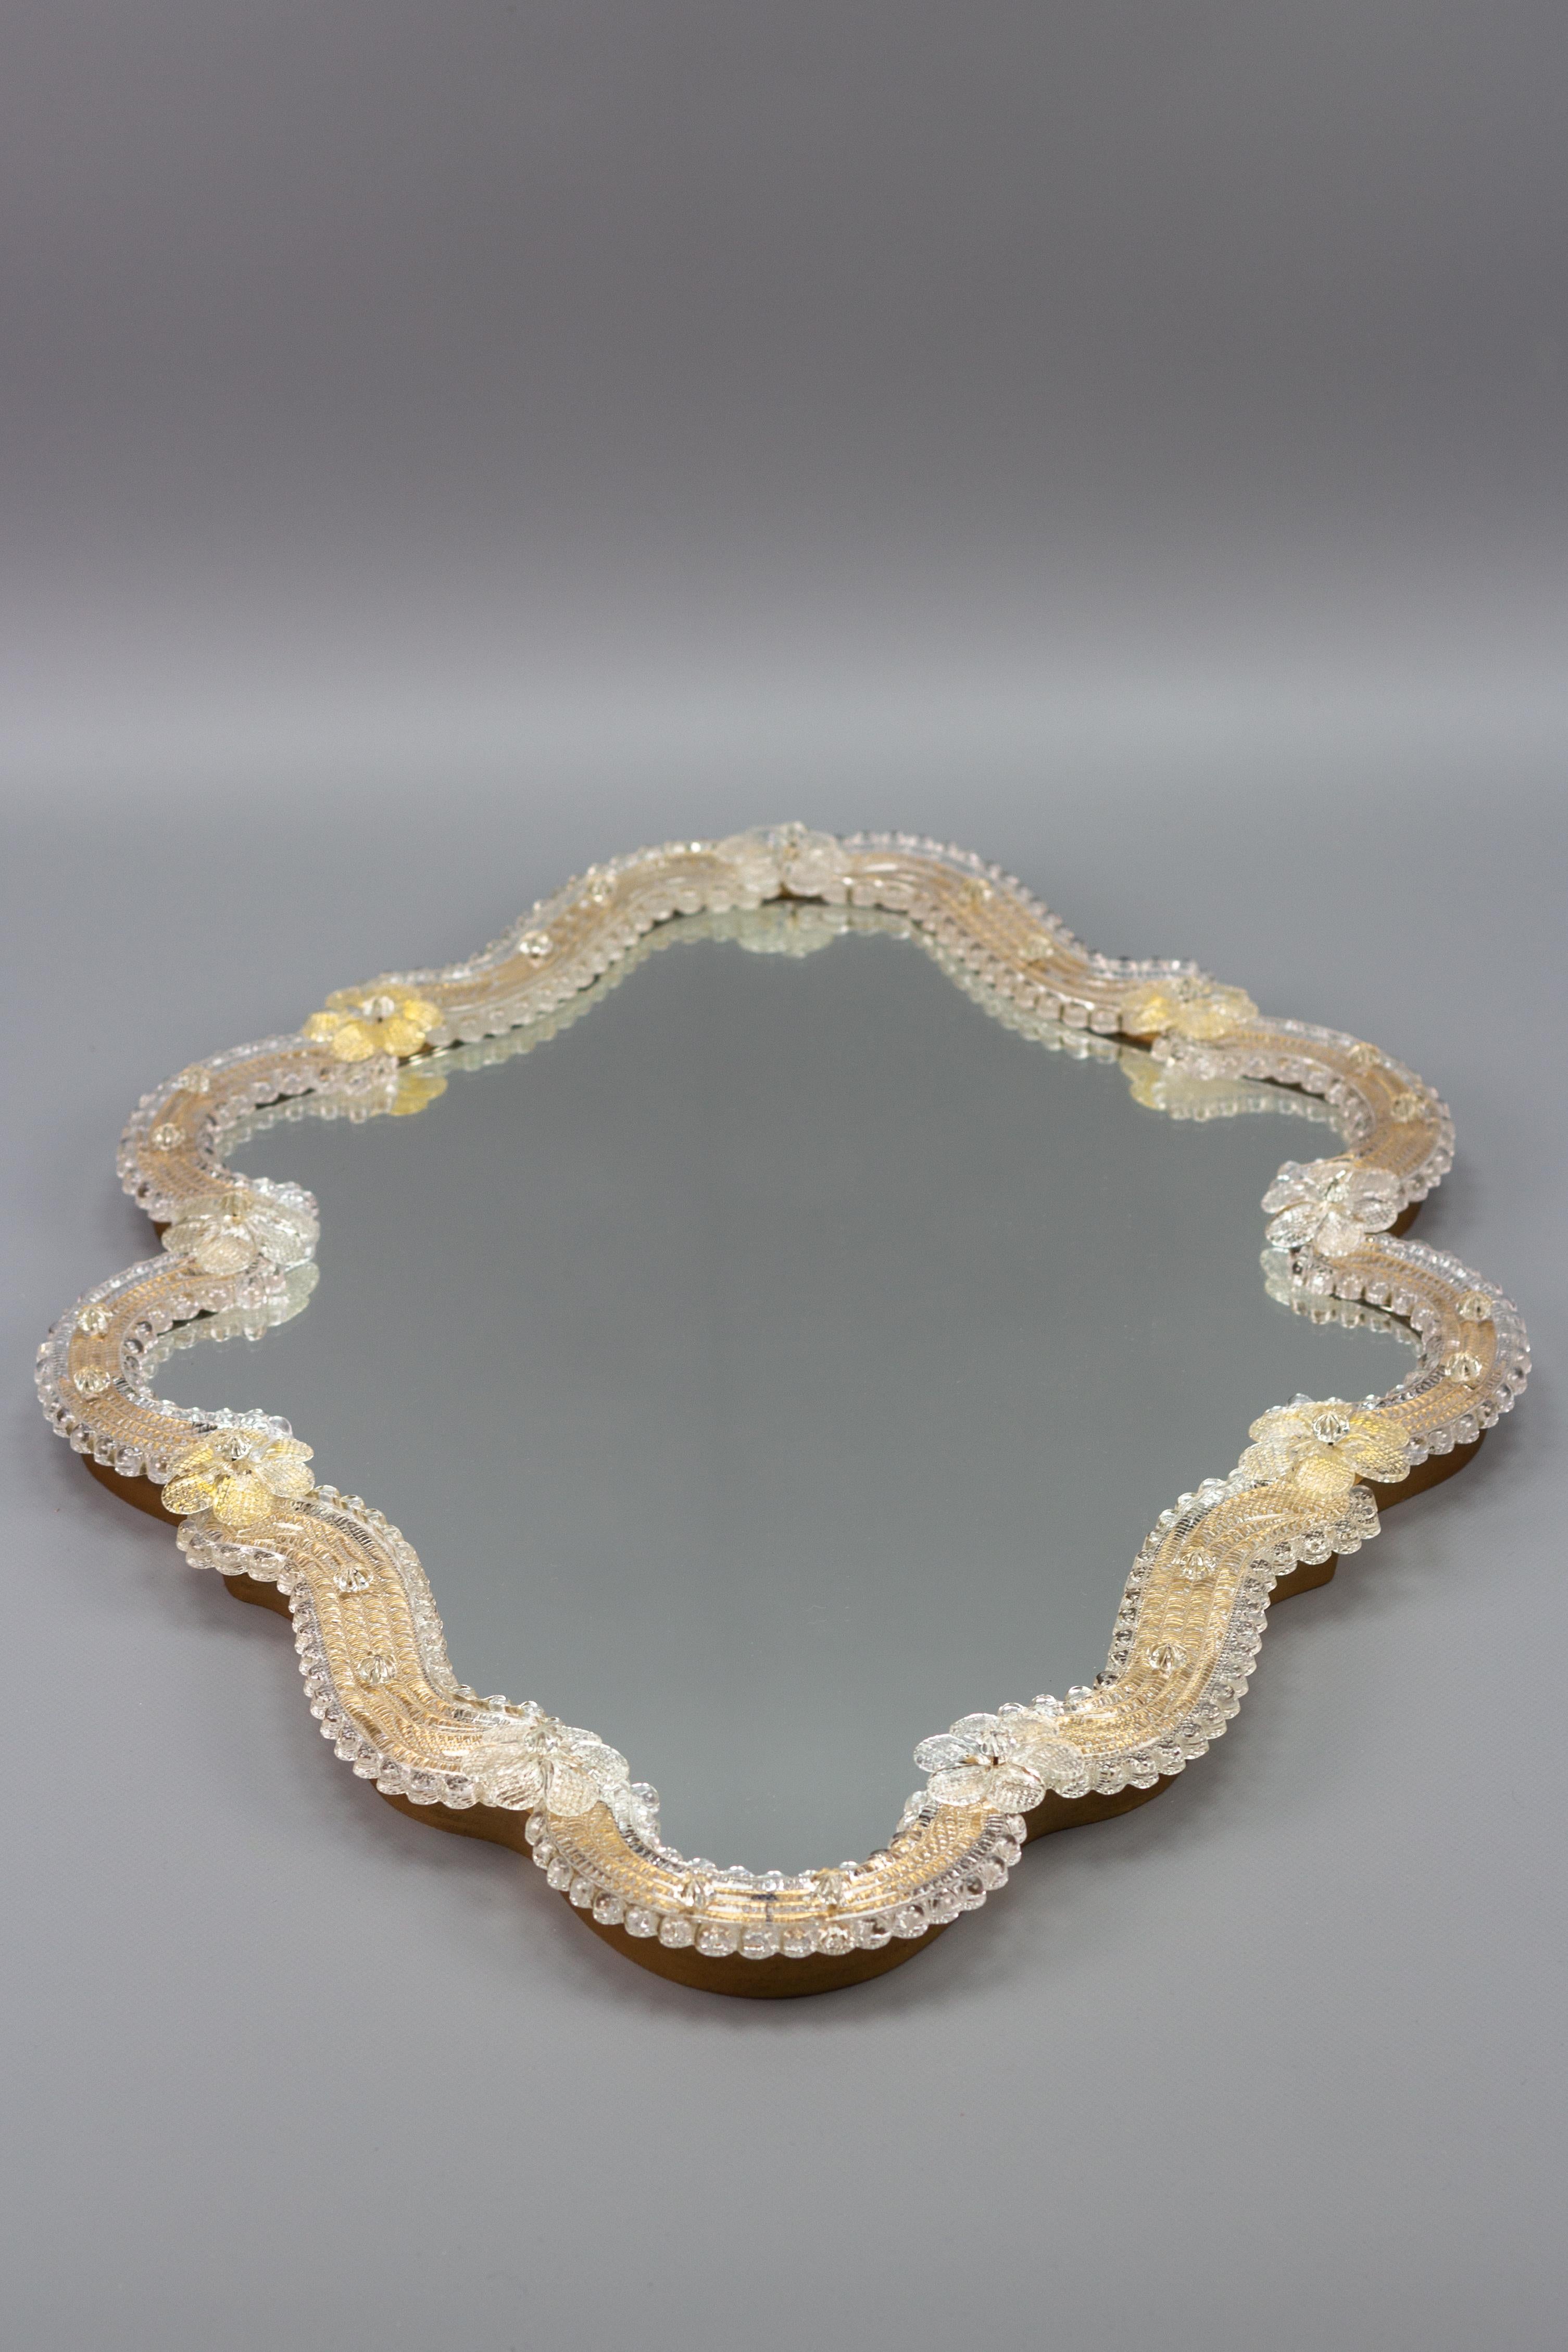 Hollywood Regency Italian Murano Glass Wall Mirror Clear and Light Golden Glass, circa 1950s